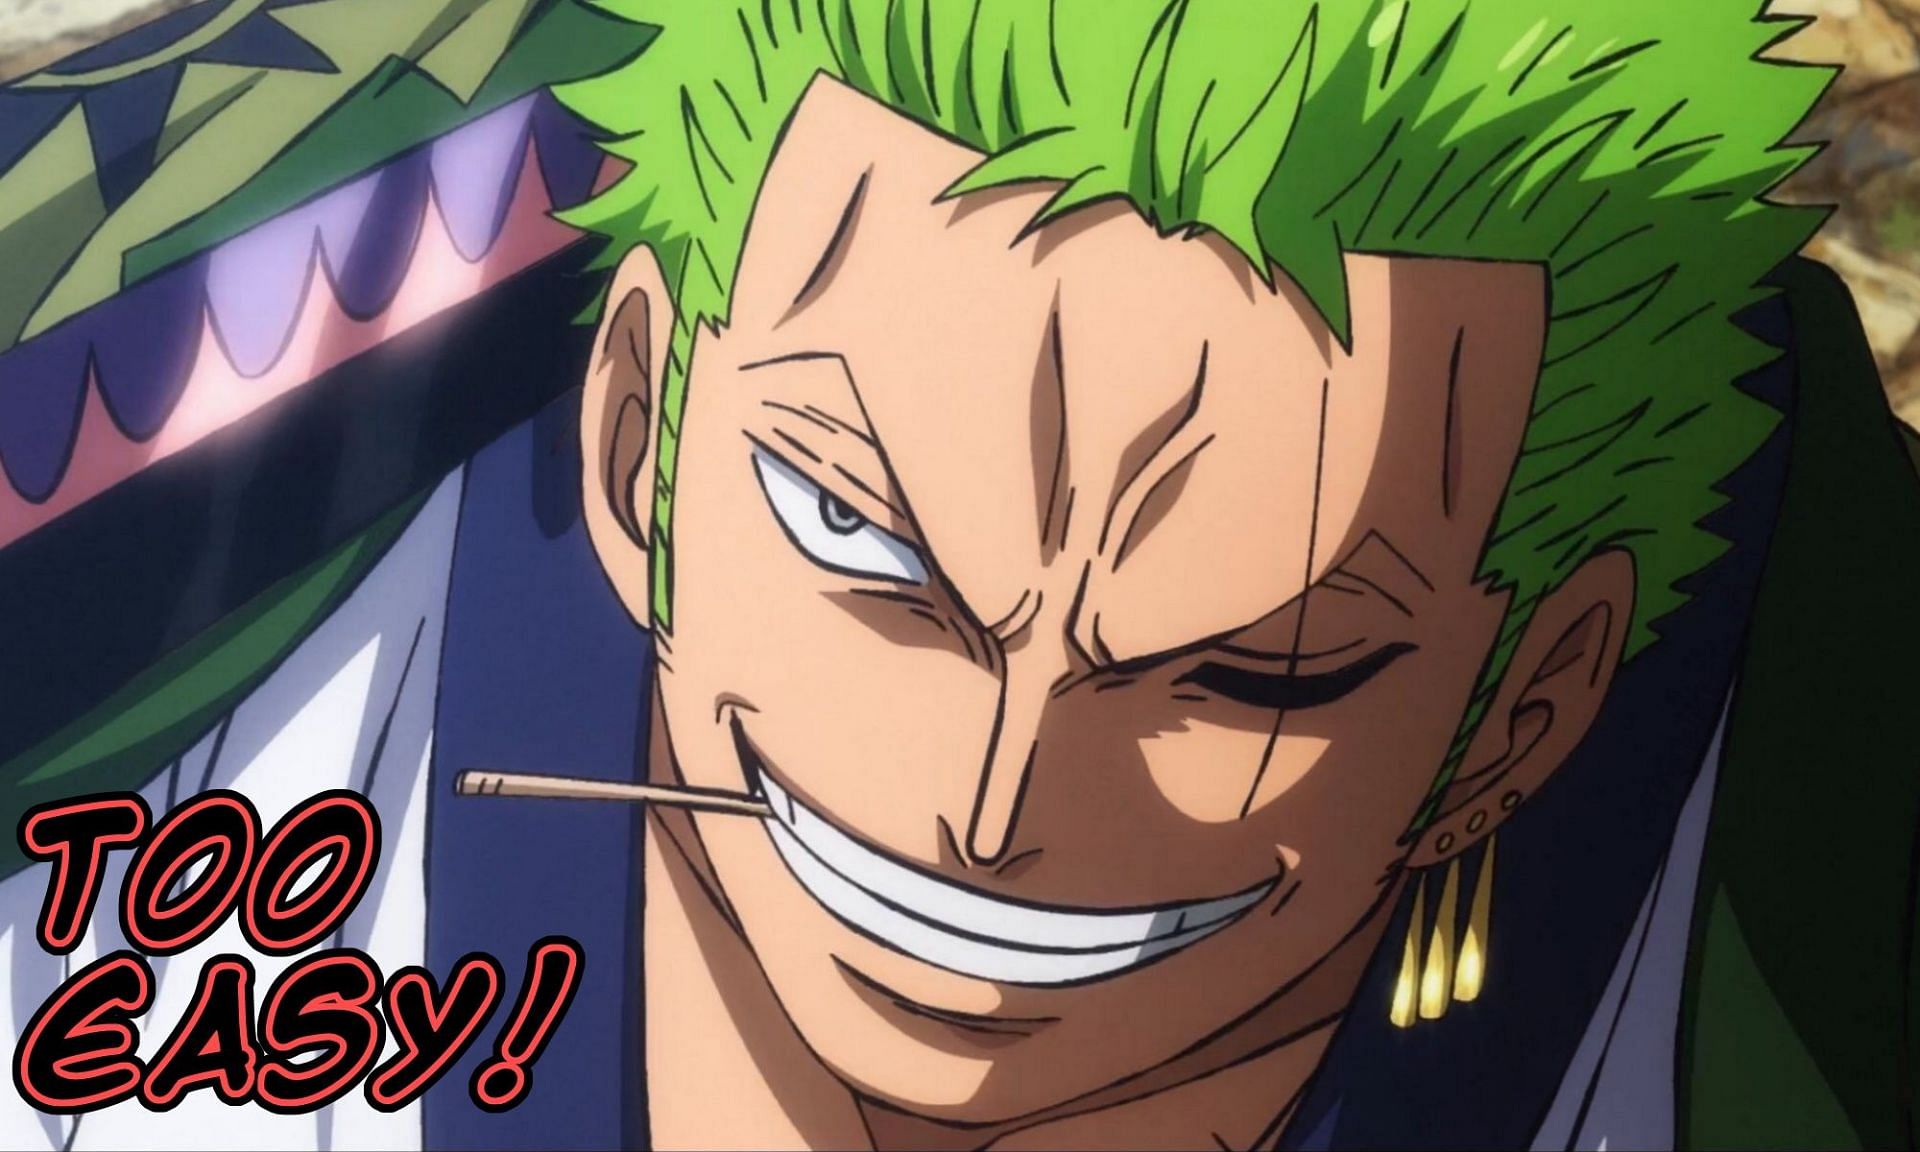 10 Times Zoro From One Piece Made Quick Work Of His Opponents